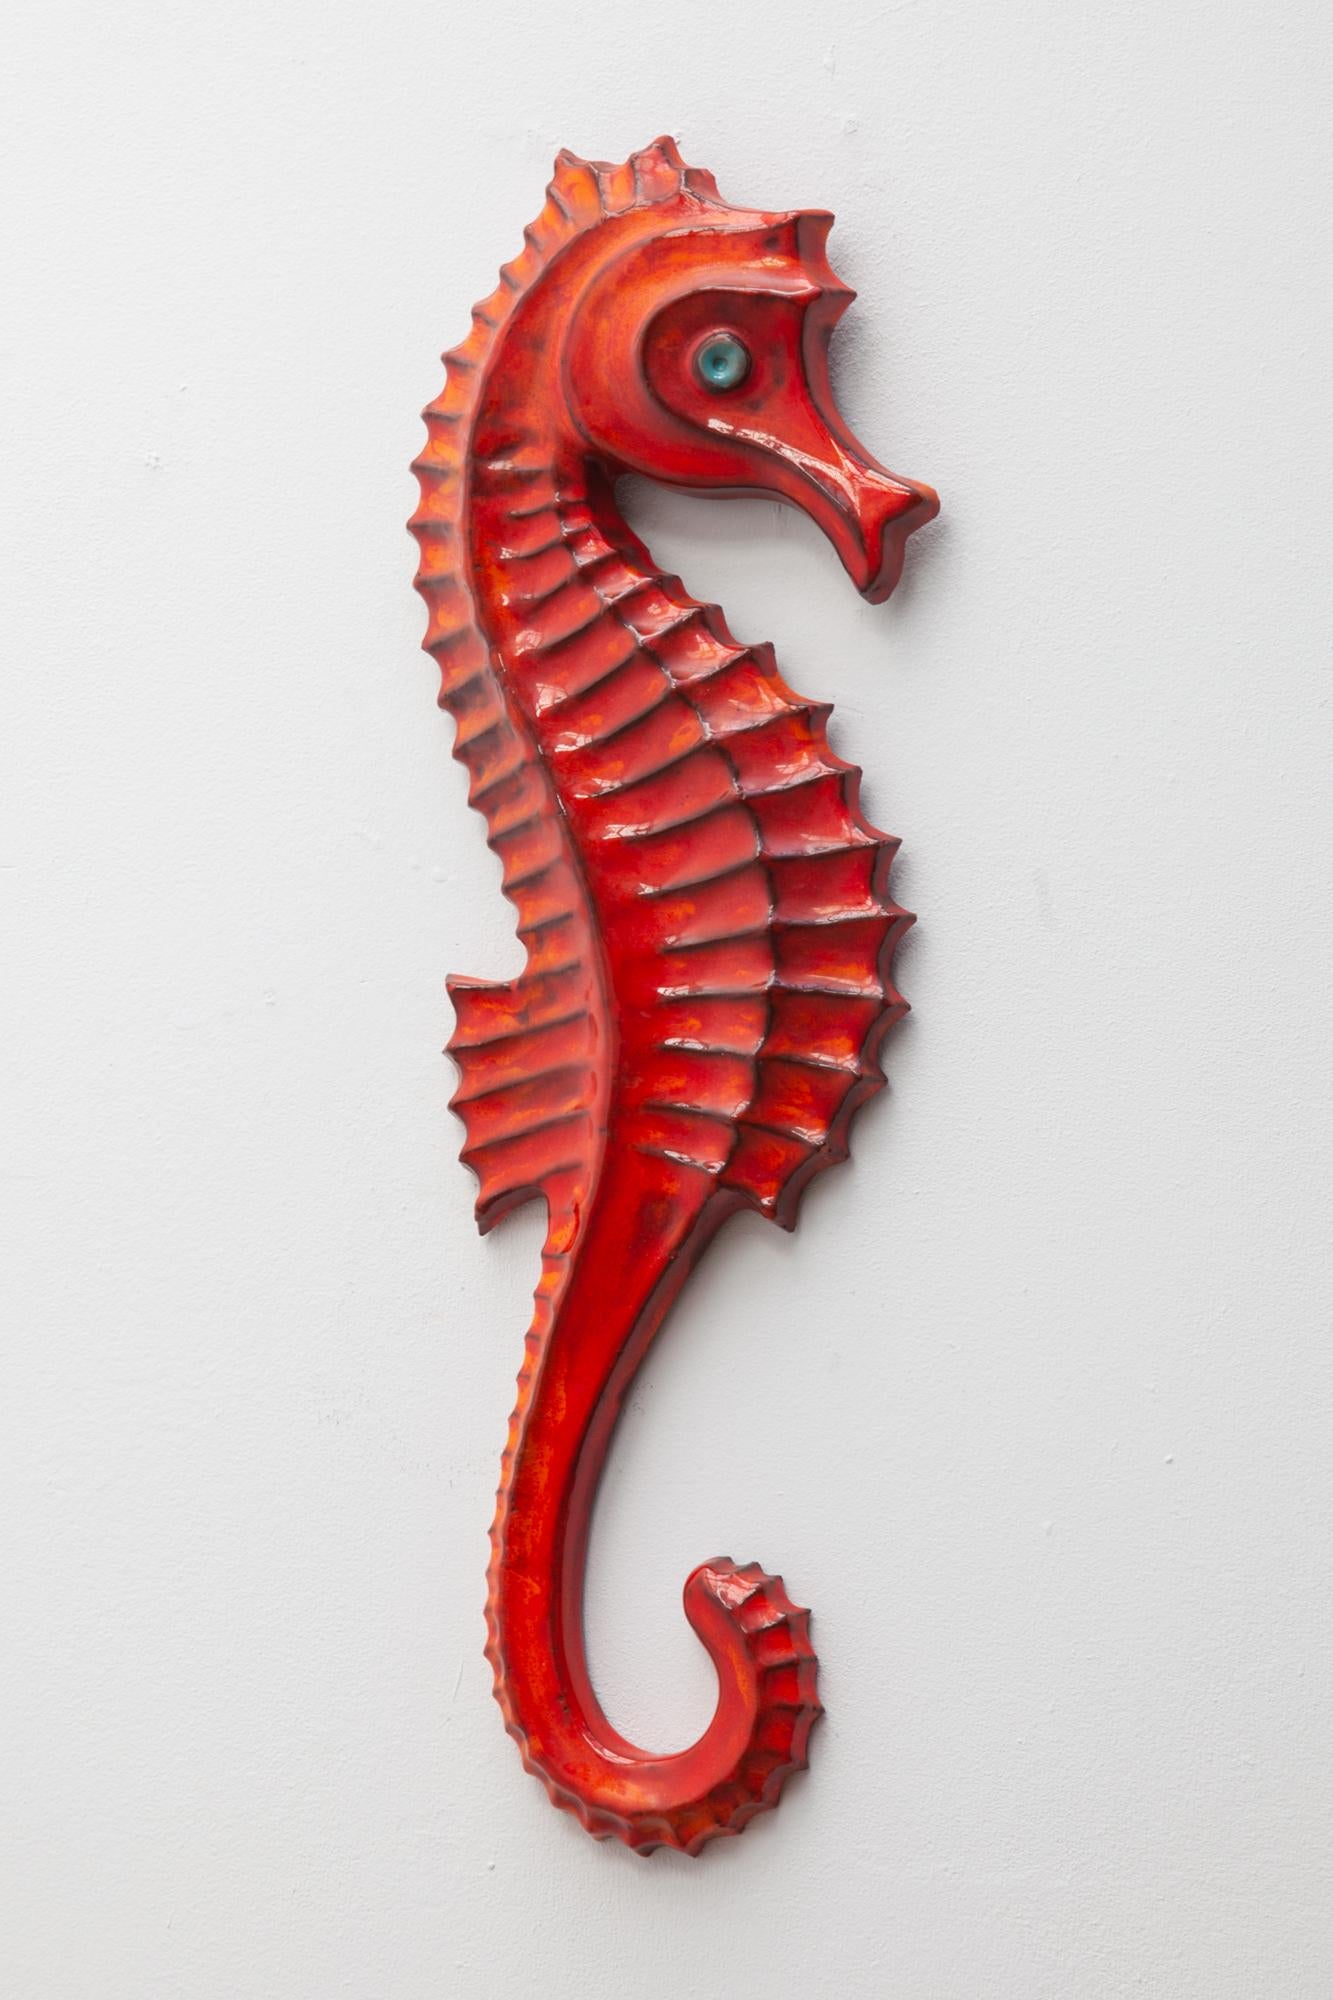 Vintage Belgian studio pottery wall art by F. Sanchez, Perignem. Two Seahorses one bigger and one smaller, facing left and right. Clay glazed in deep orange.
Signed on the back.

Big one: 17 W x 1.5 D x 53 H cm
Small one: 14 W x 1.5 D x 44 H cm.